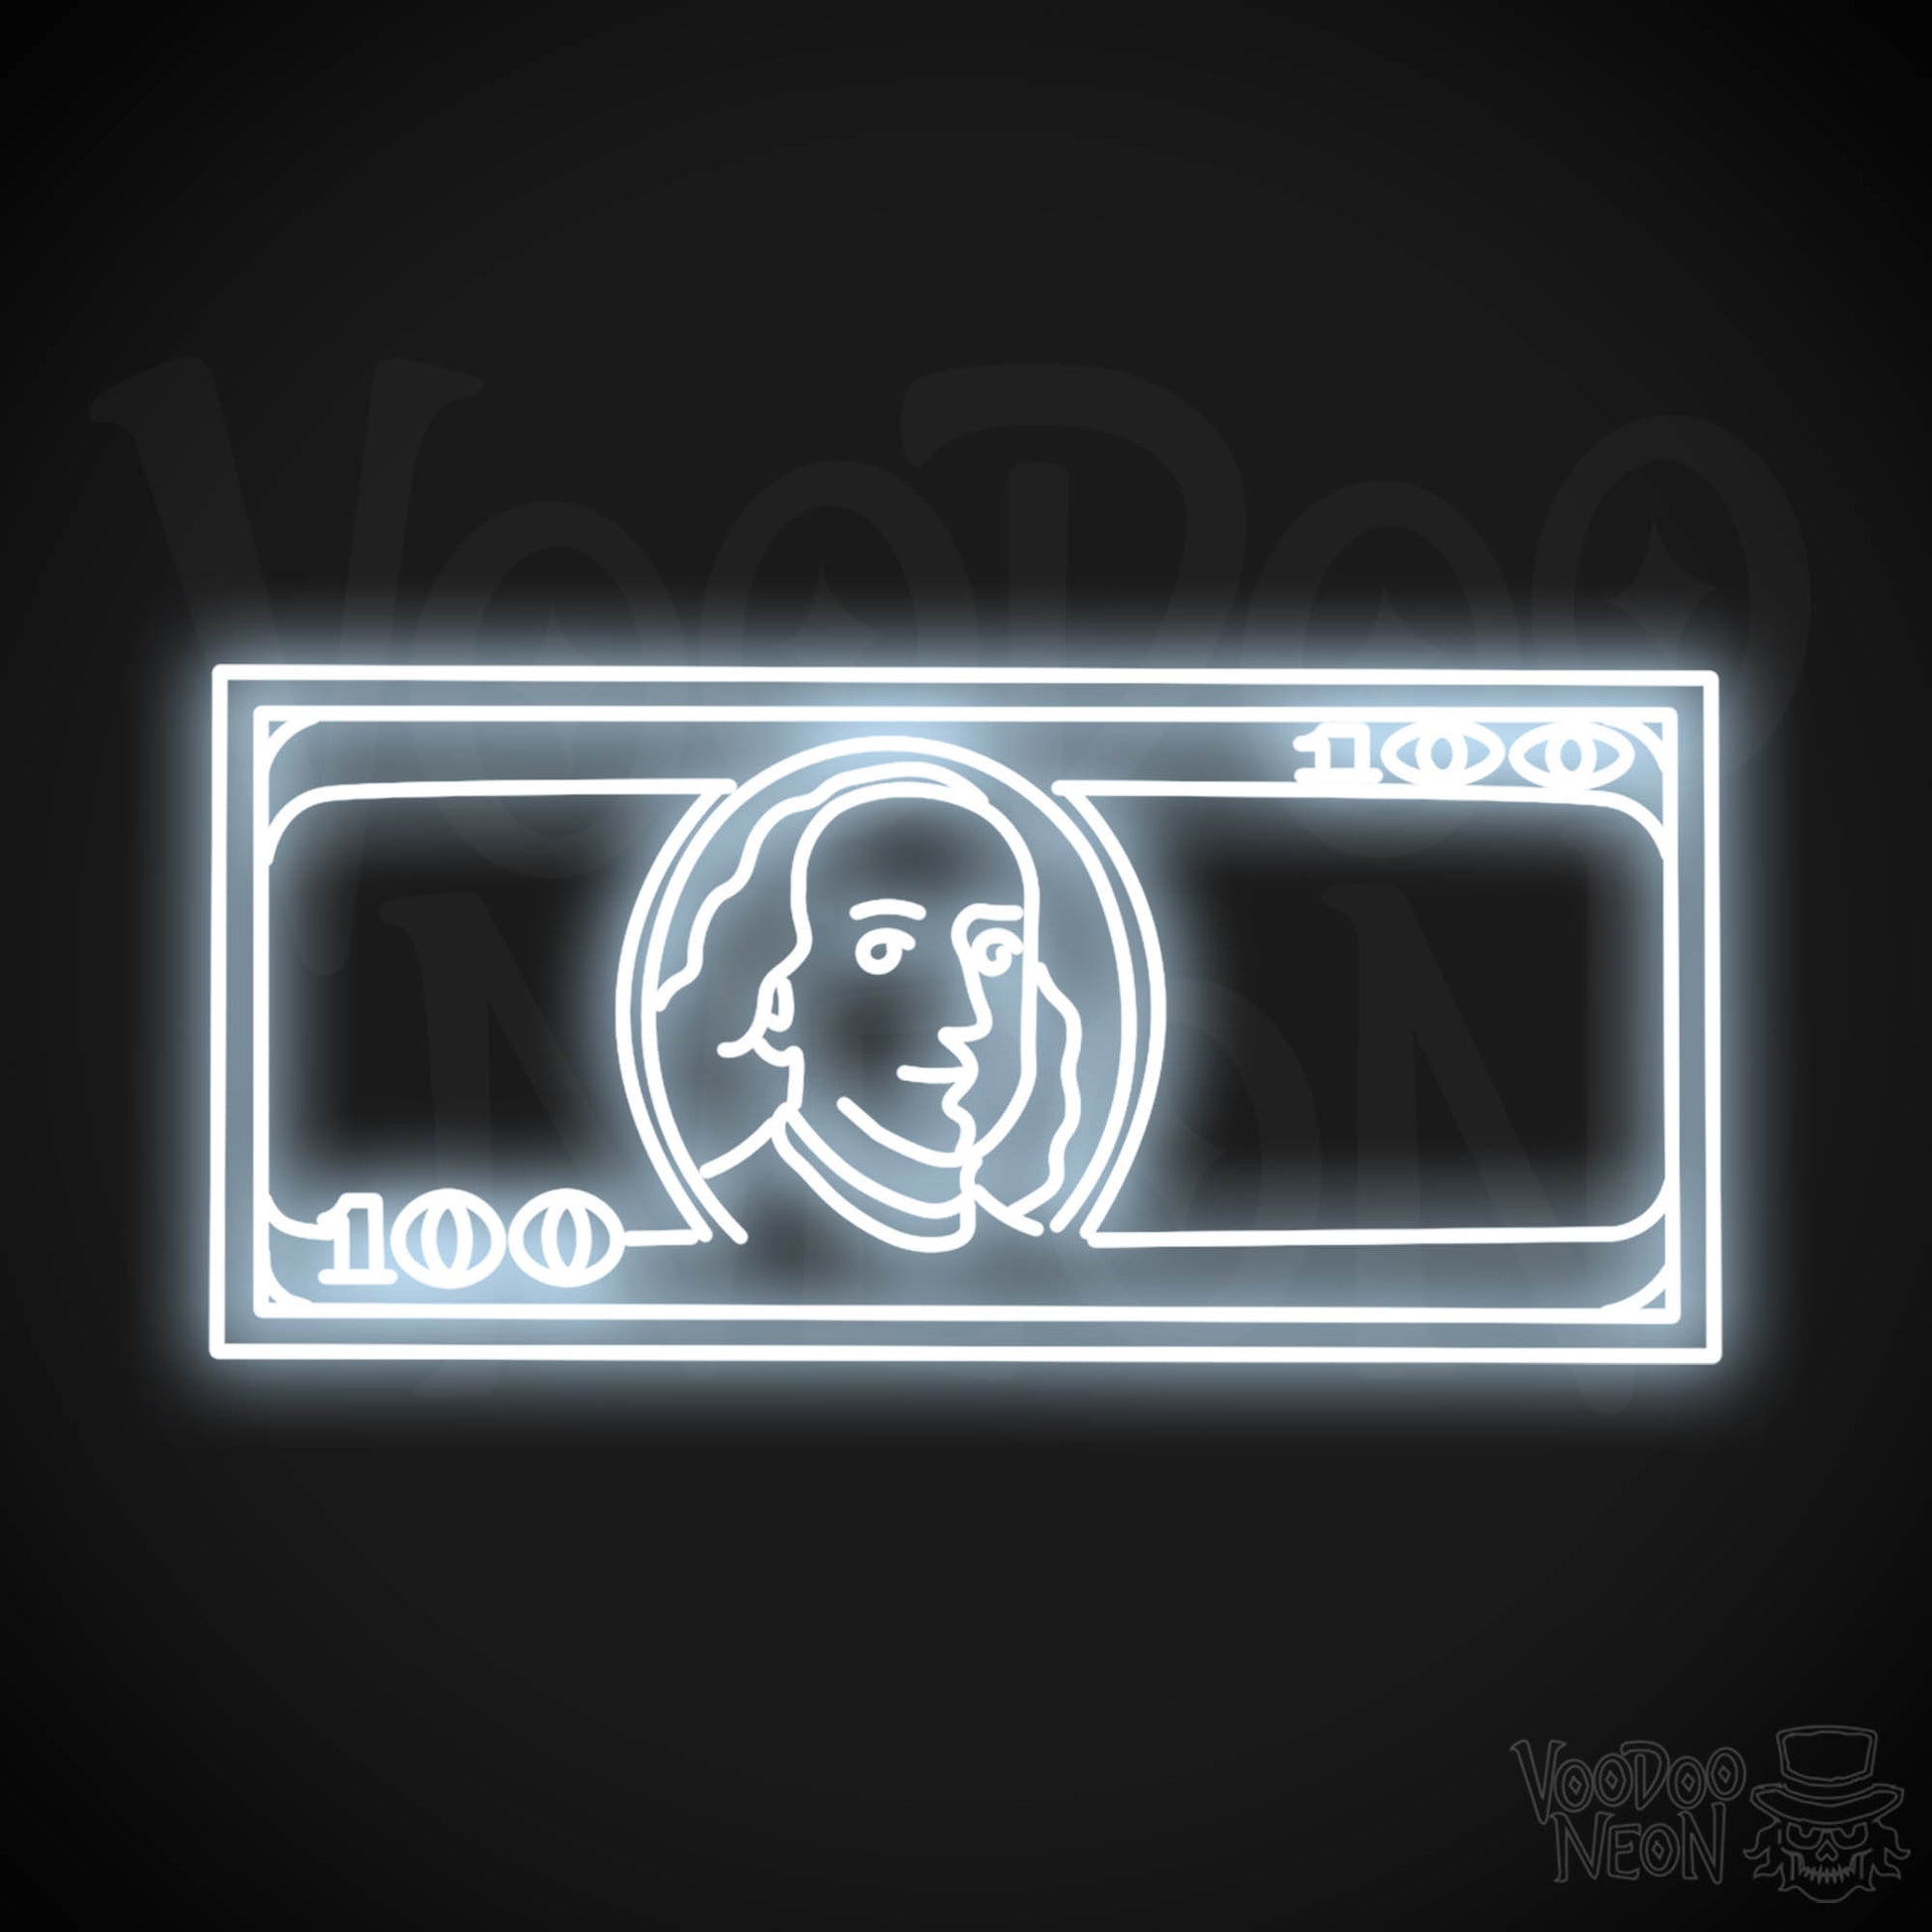 US $100 Bill Neon Sign - Neon $100 Sign - Color Cool White